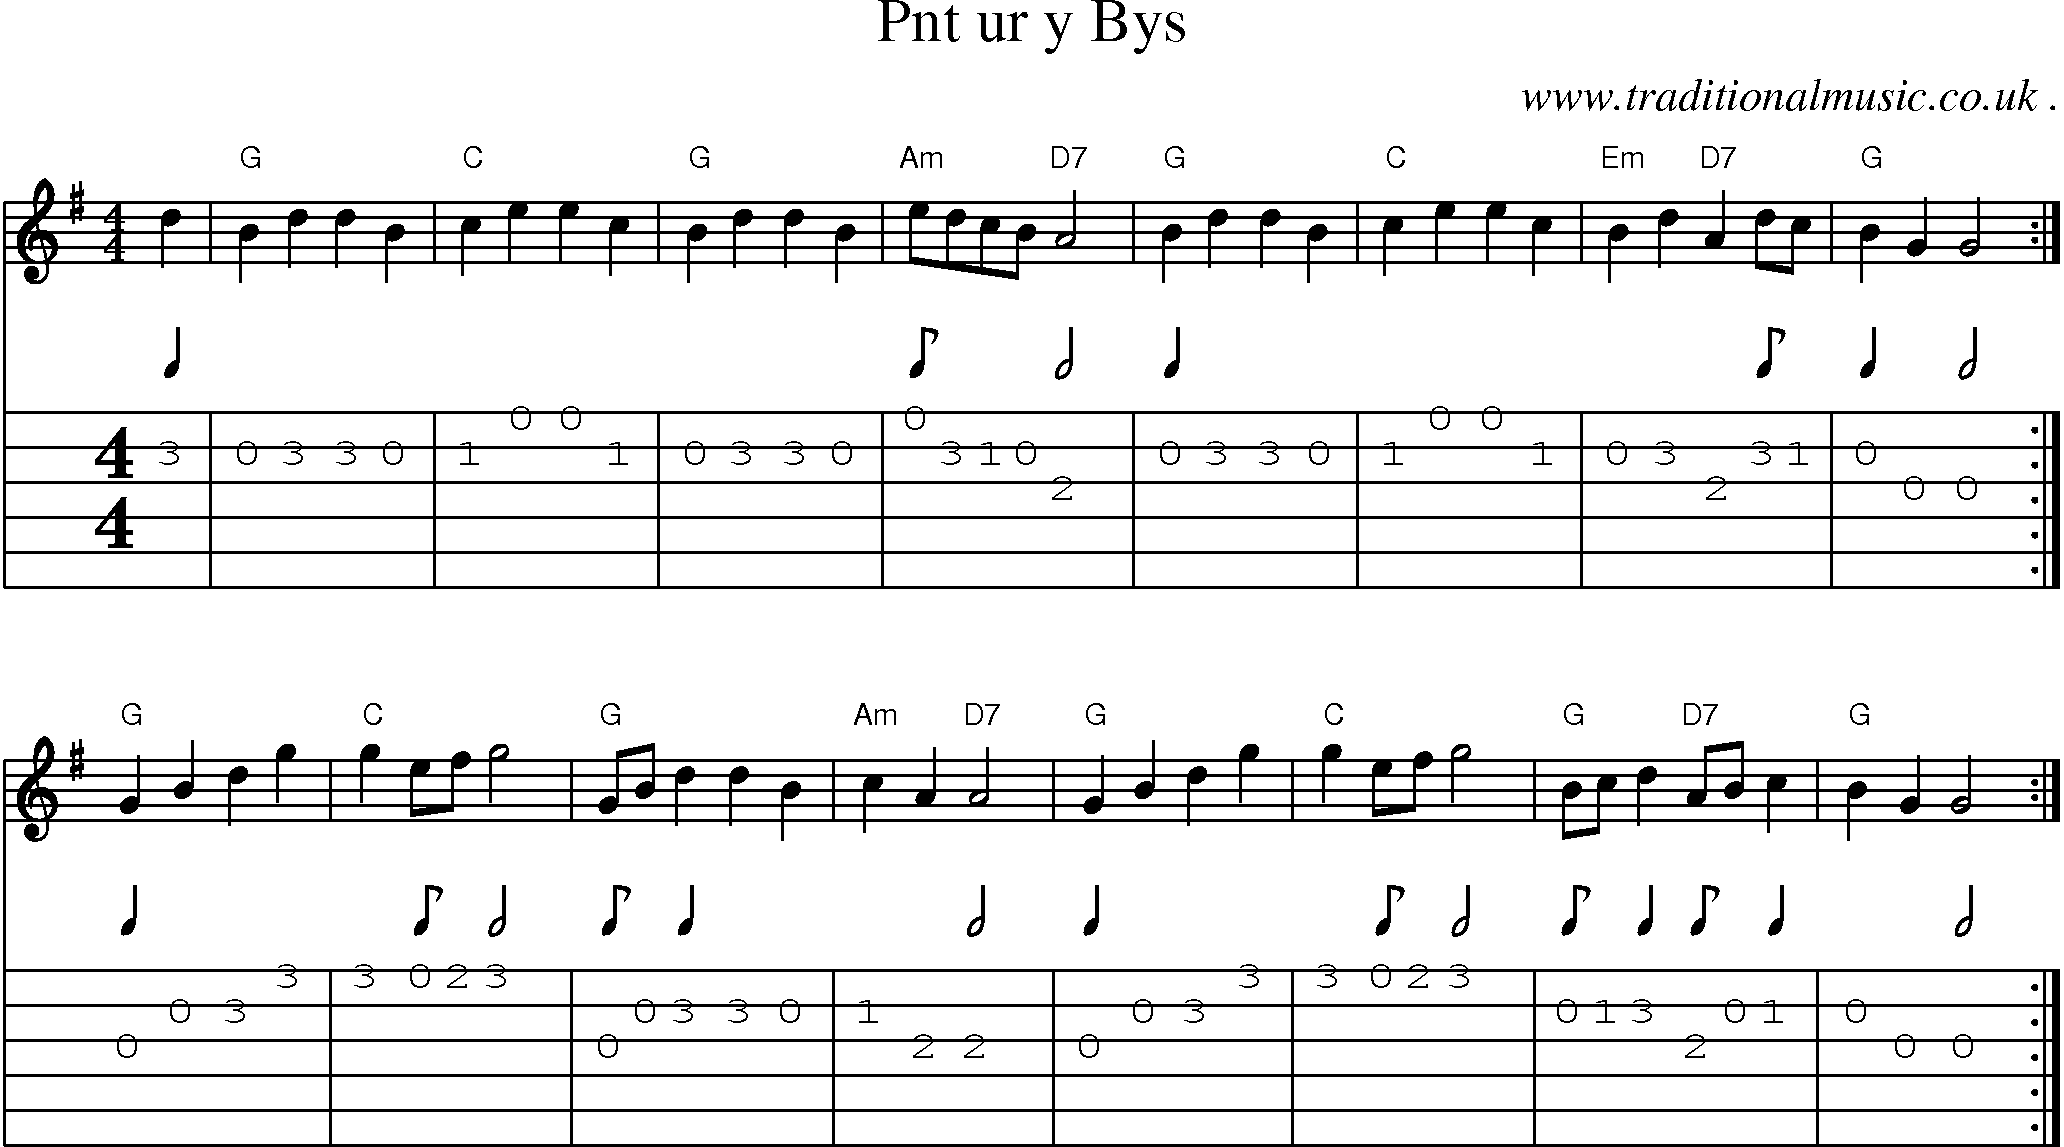 Sheet-Music and Guitar Tabs for Pnt Ur Y Bys